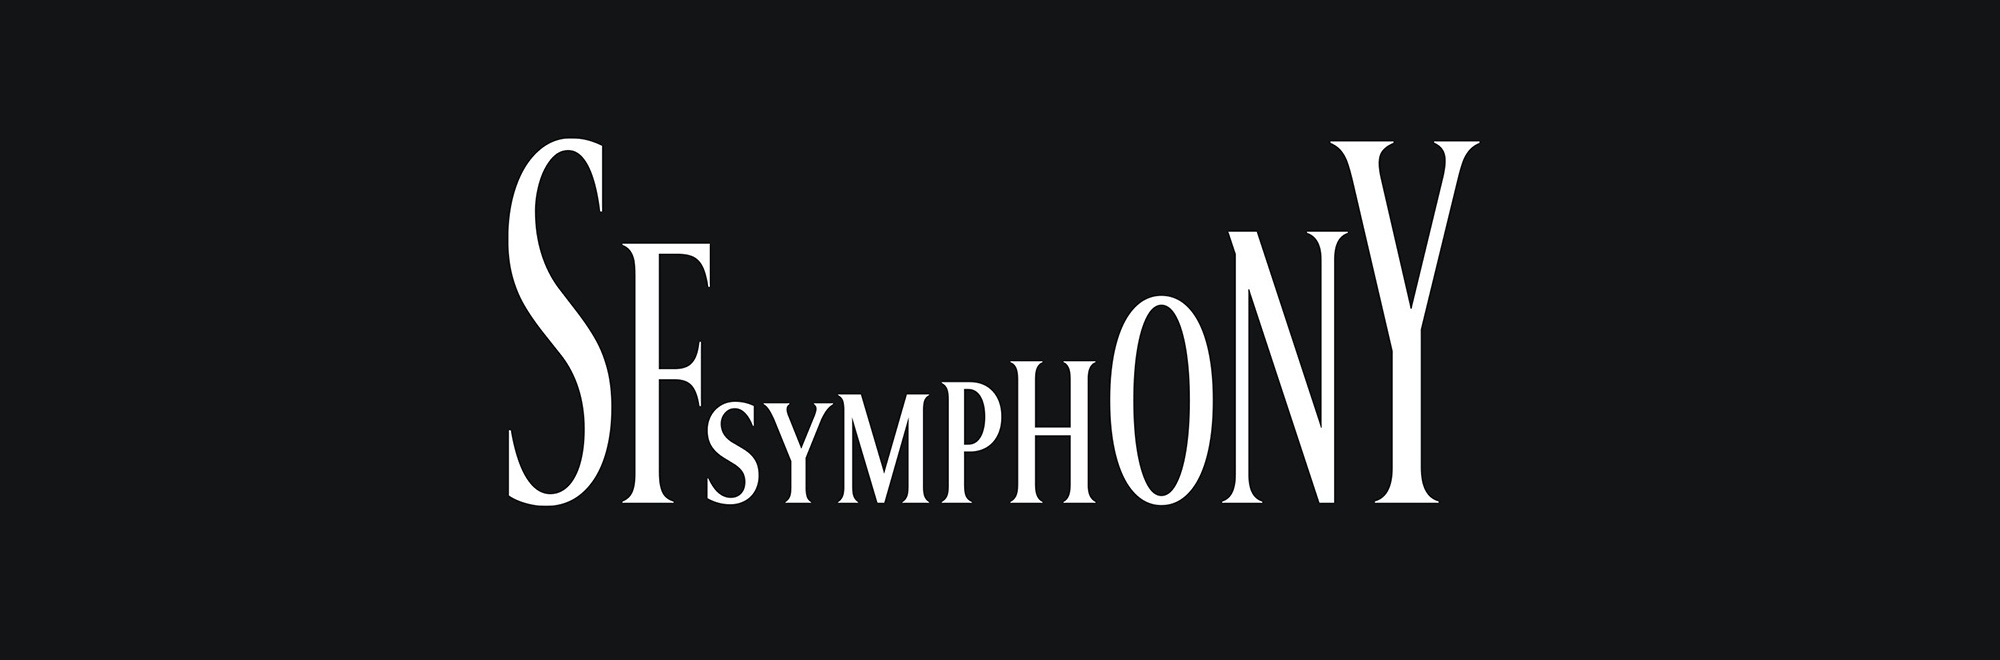 The classical concert experience is reimagined as an art form for the San Francisco Symphony